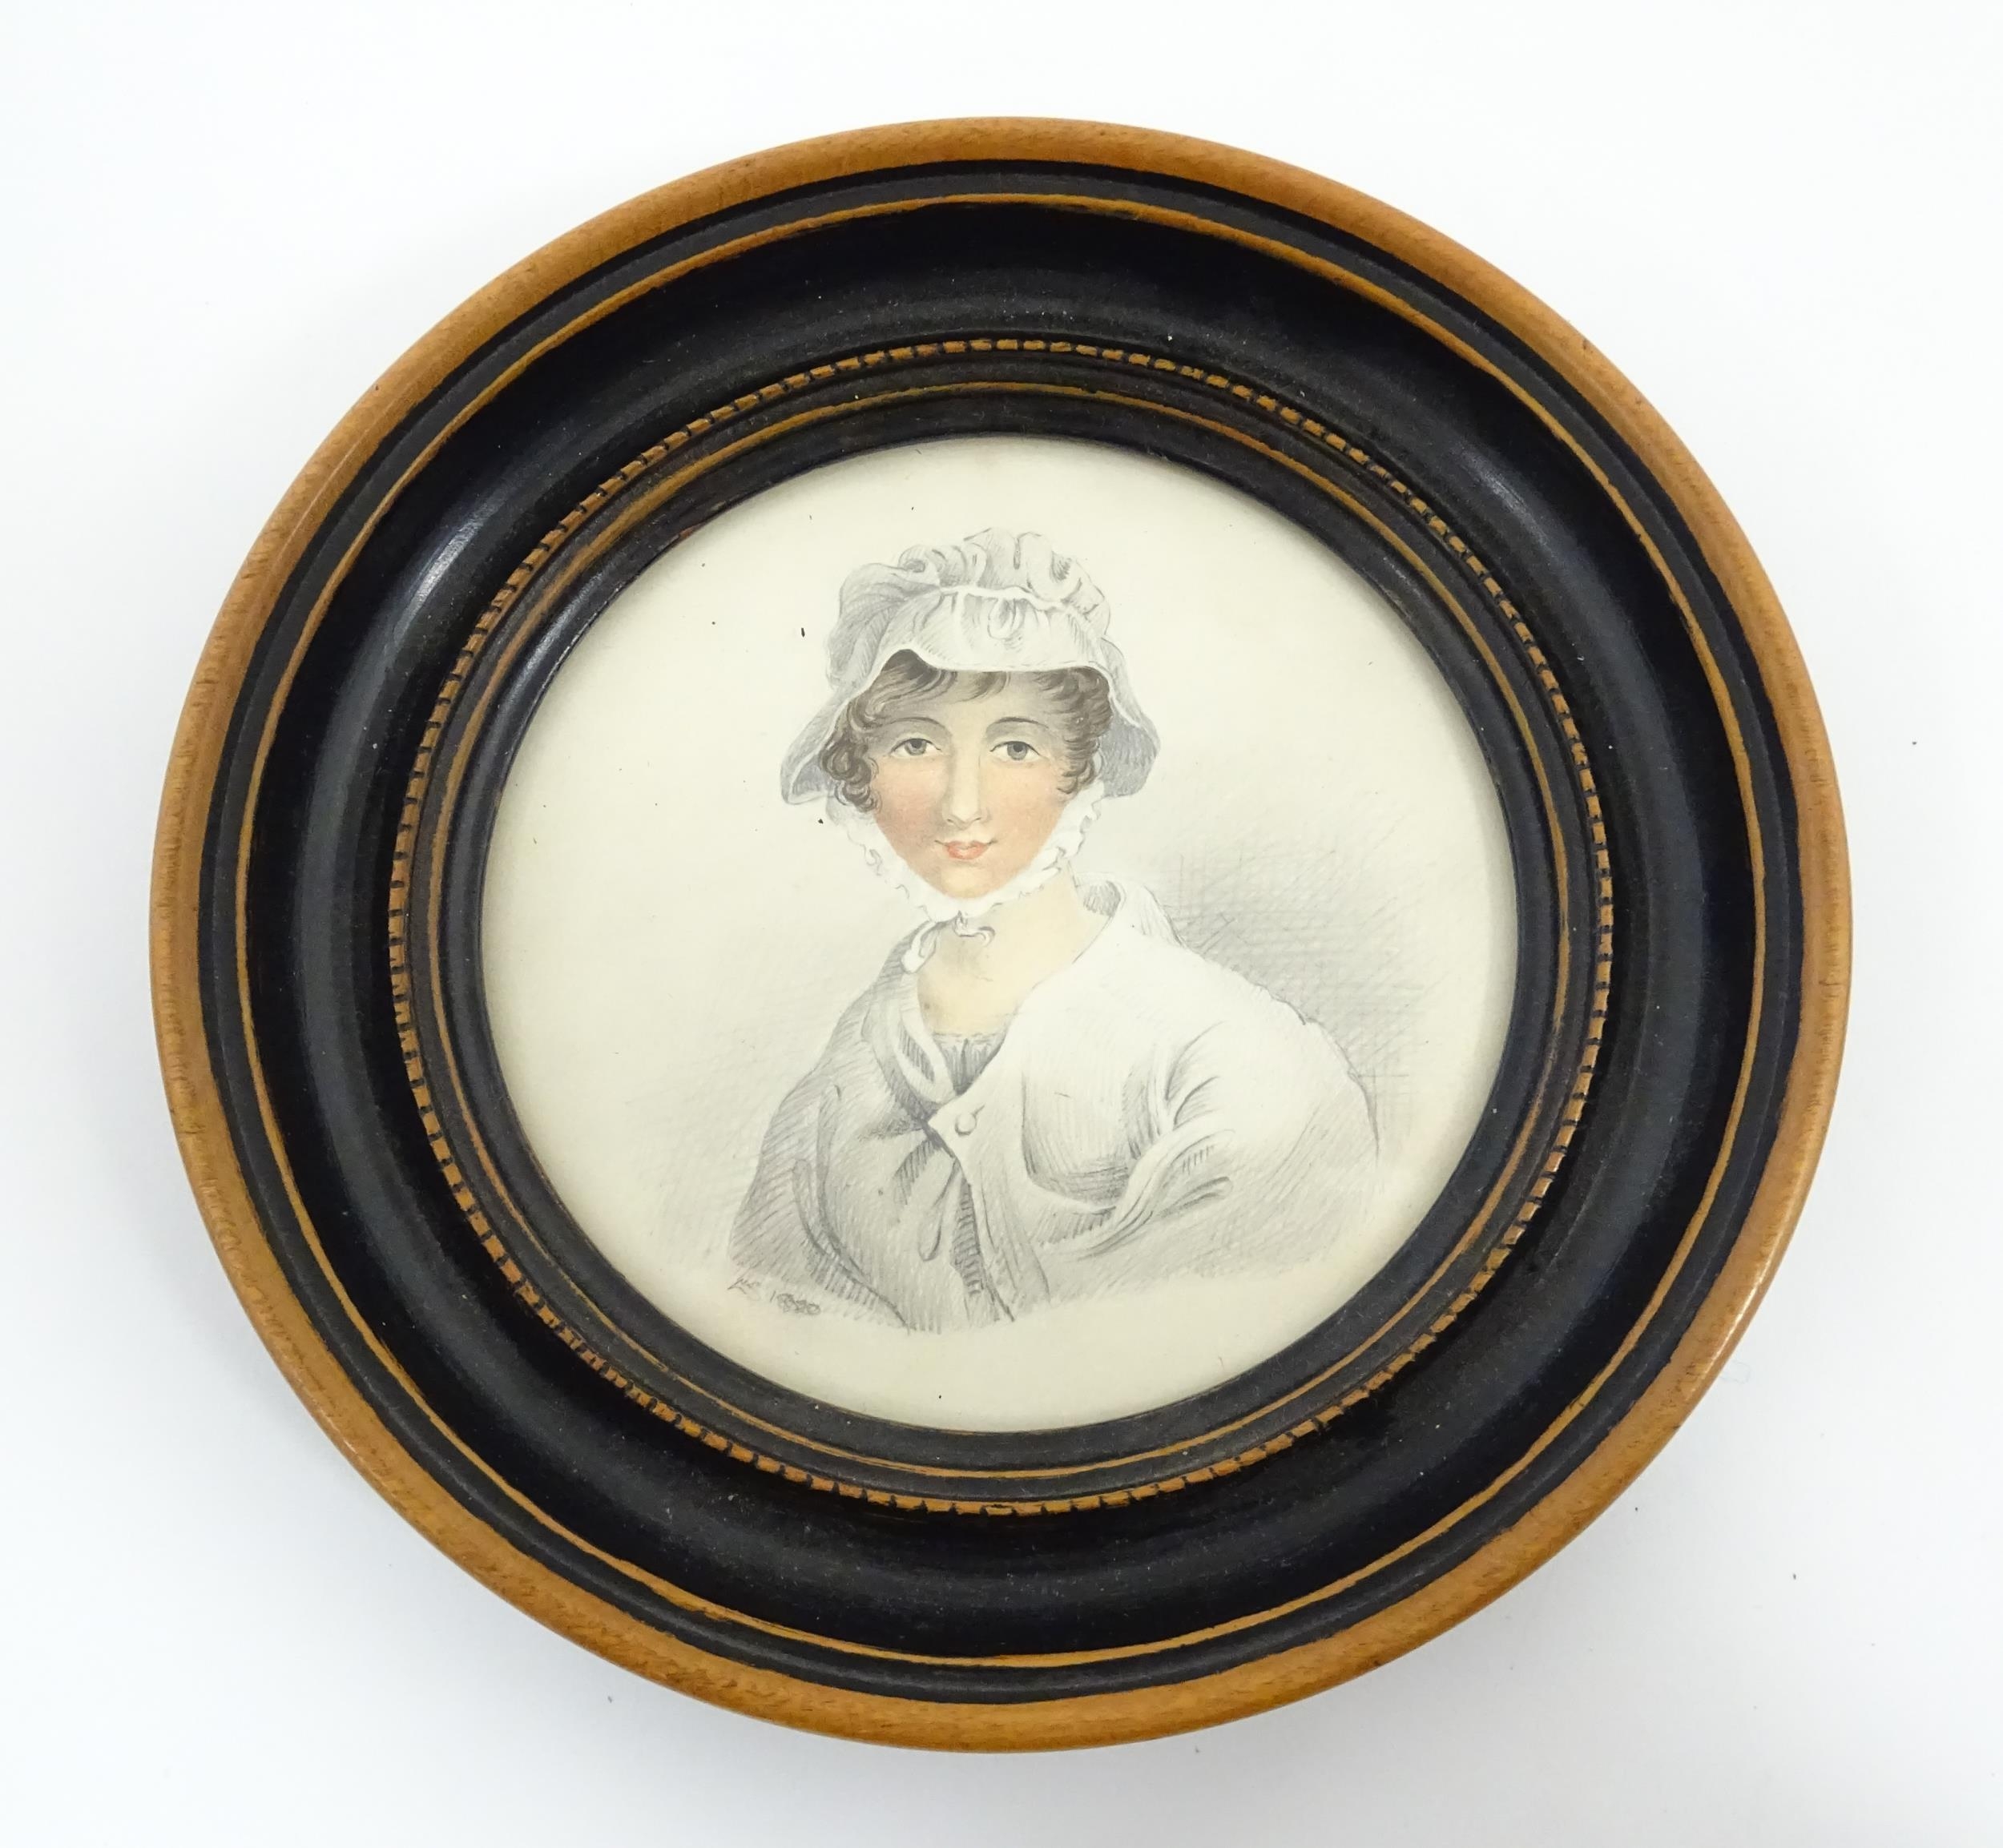 A 19thC pencil and watercolour portrait miniature depicting a portrait of a young lady wearing a